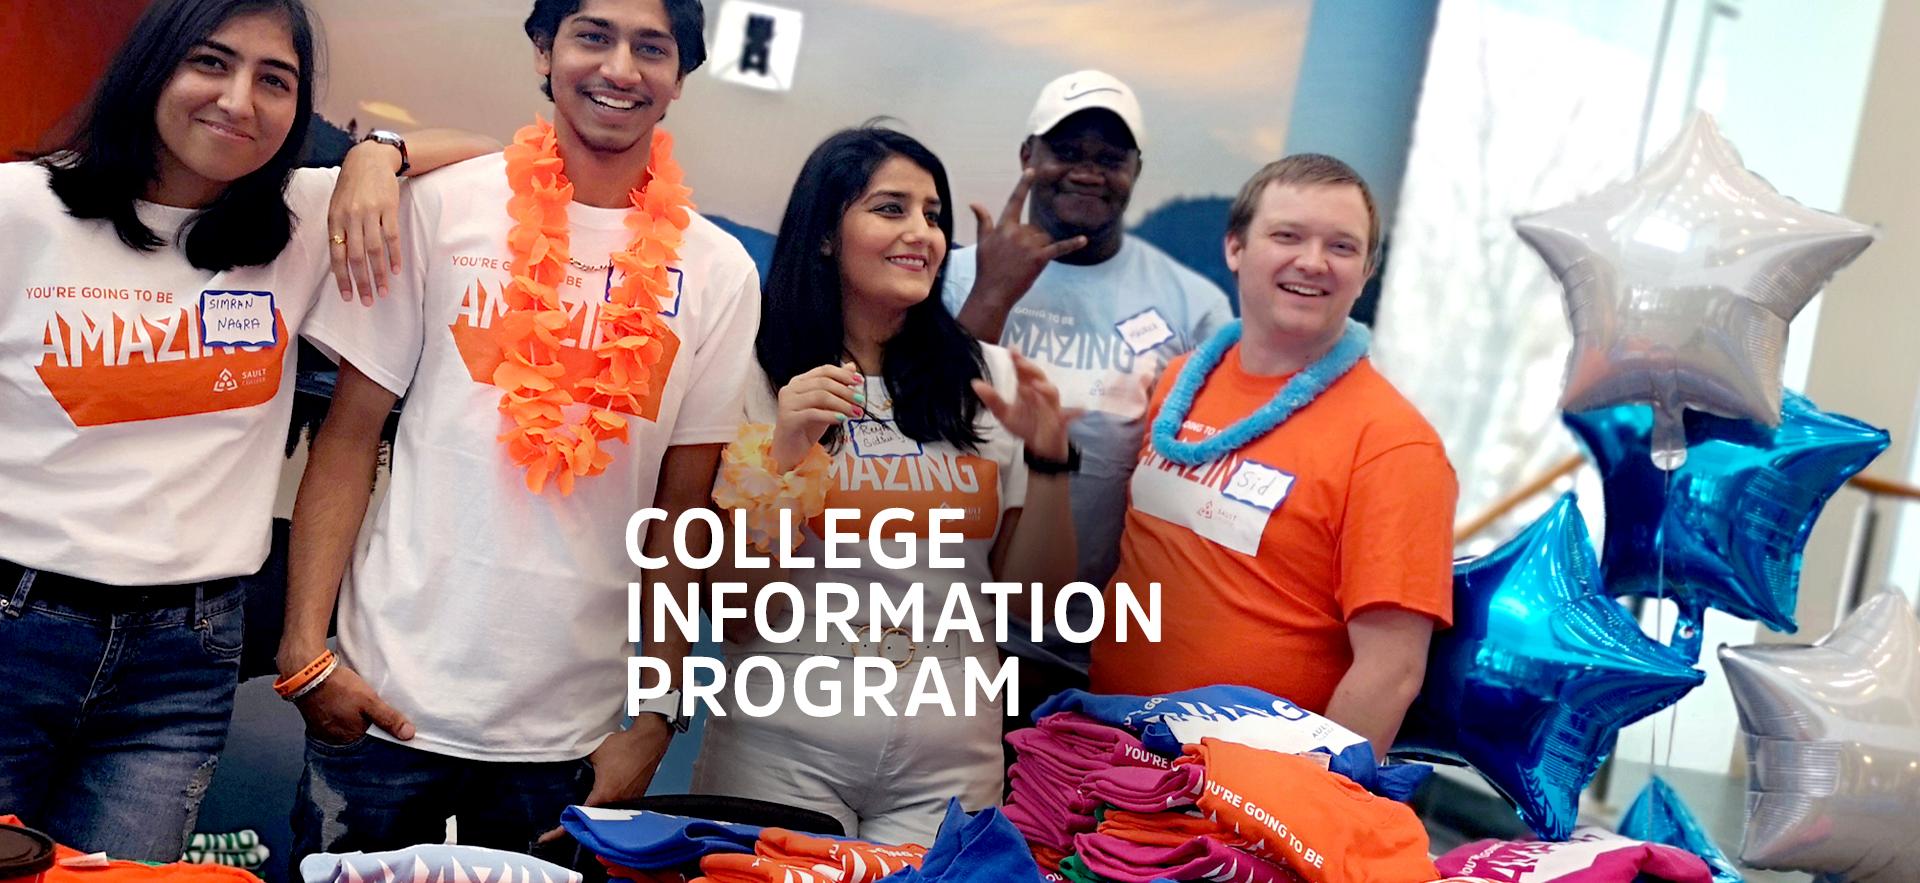 Students gathered together wearing Sault College shirts behind a booth for the College Information Program